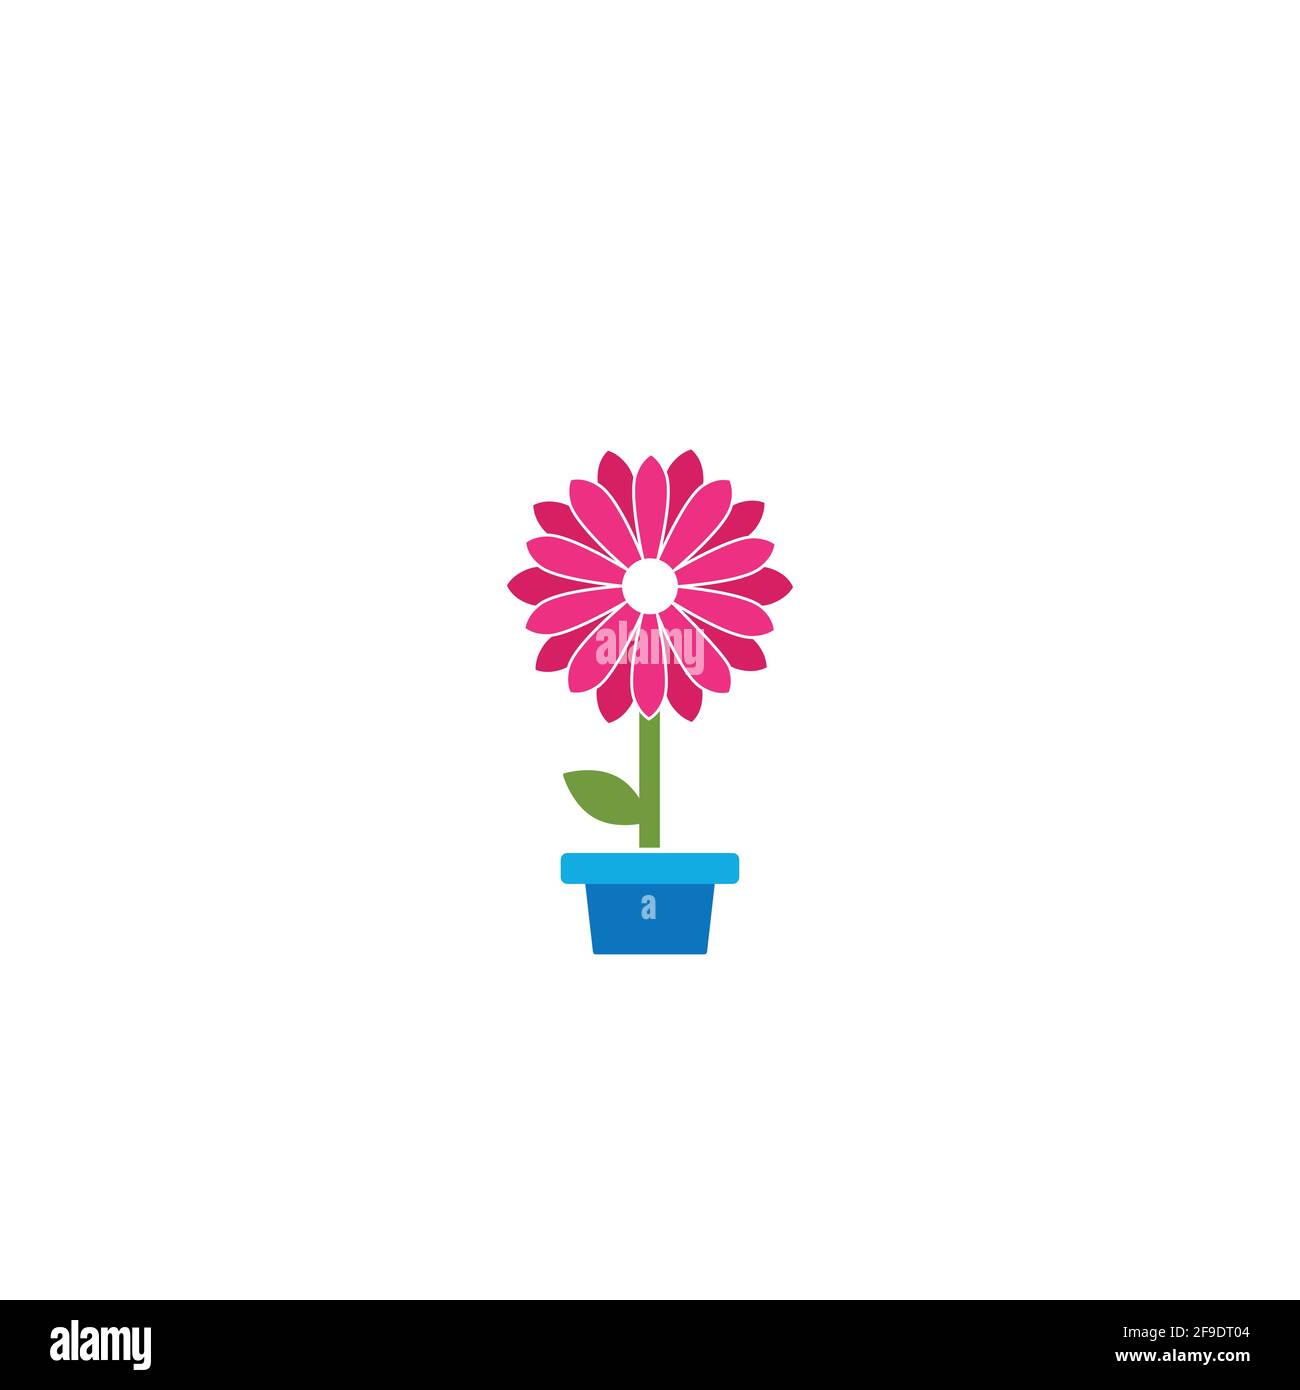 Black flat icon of pink chrysanthemum flower with sprig and leaf in blue pot. Big Bloom with big sharp petals and white core. Isolated on white. Vecto Stock Vector